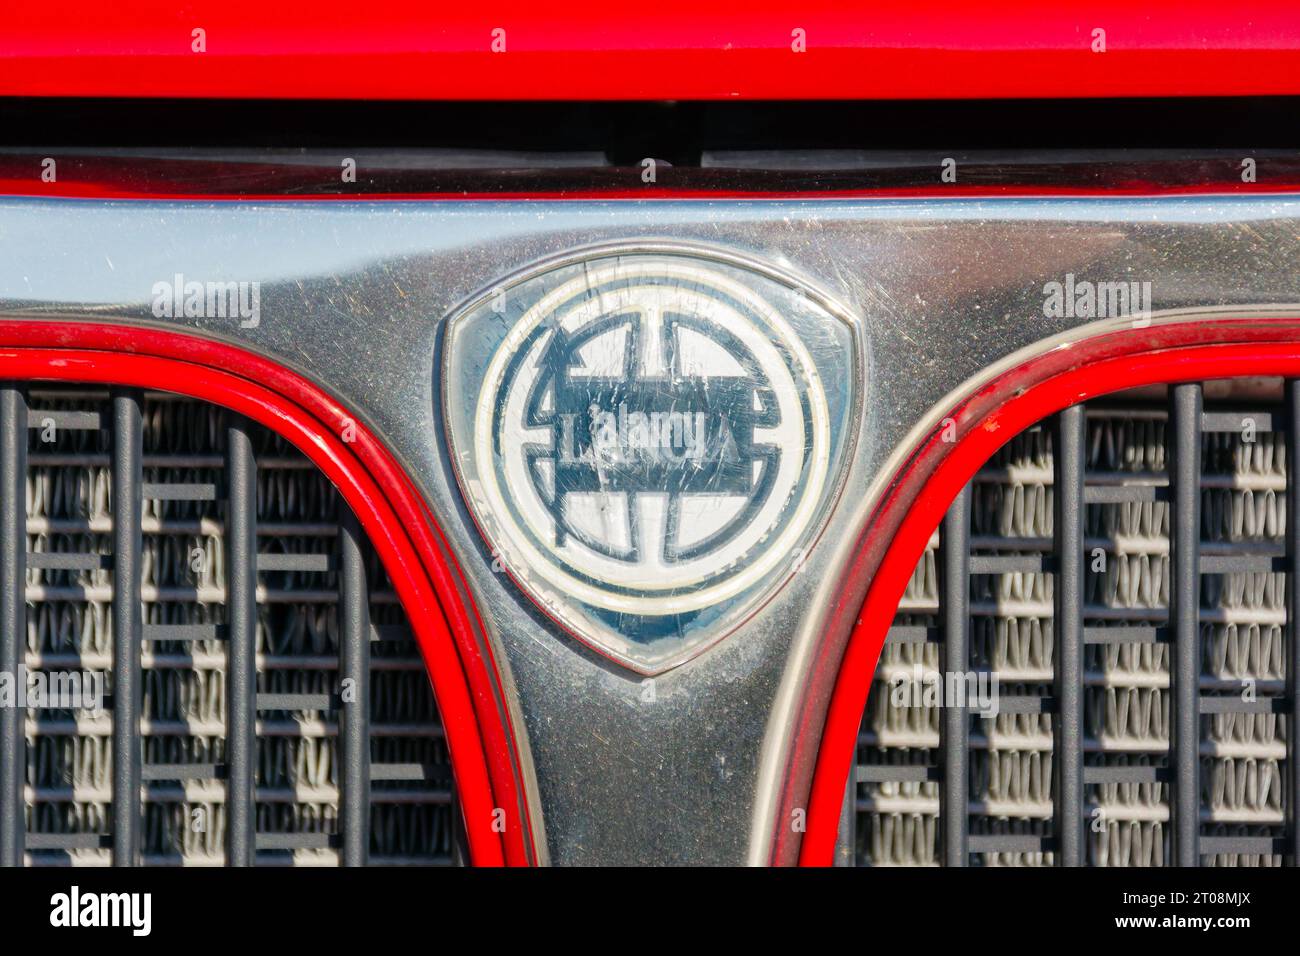 shabby lancia hood ornament on the grill of a legendary rally car. vehicle of a red color Stock Photo